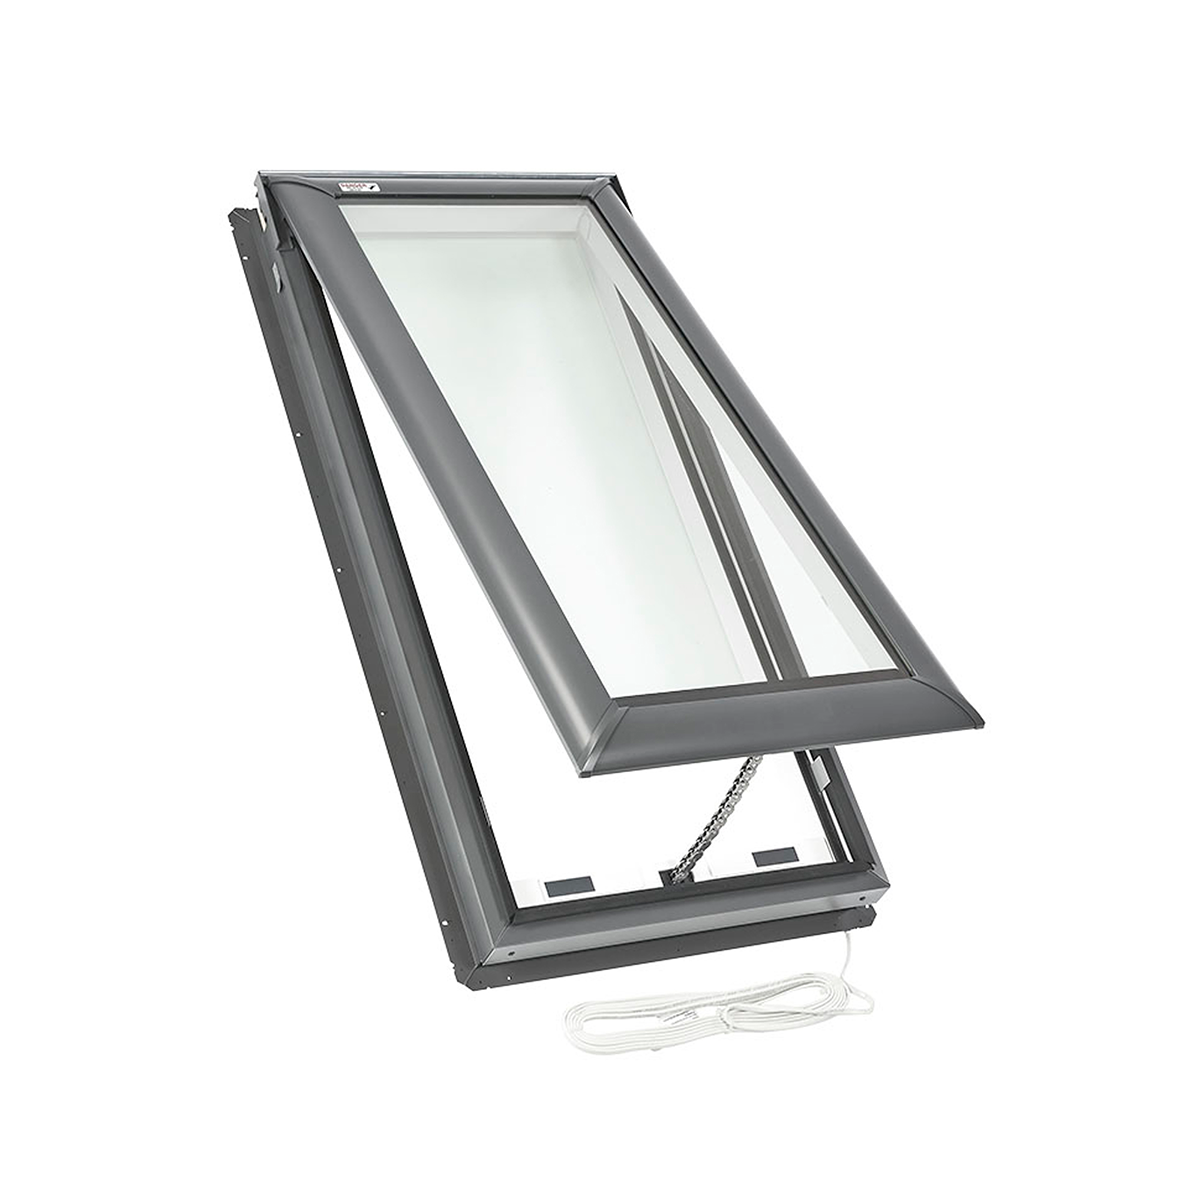 Electric Deck-Mount Skylight with Laminated Low-E3 Glass - 21 in. x 37-7/8 in. - VSE C04